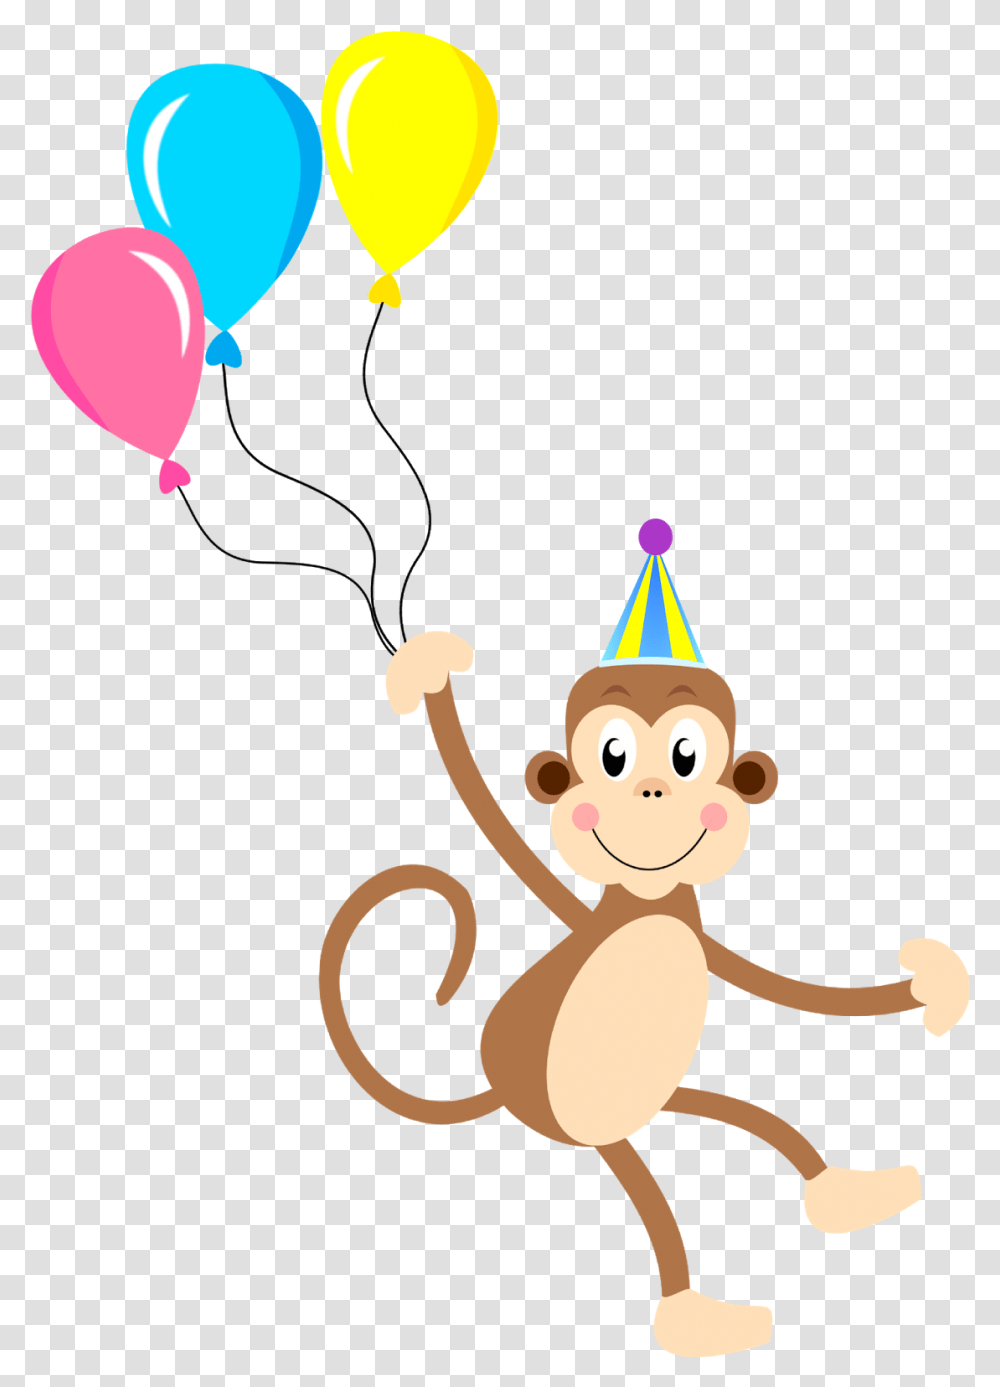 Macaco Portable Network Graphics, Apparel, Party Hat, Snowman Transparent Png